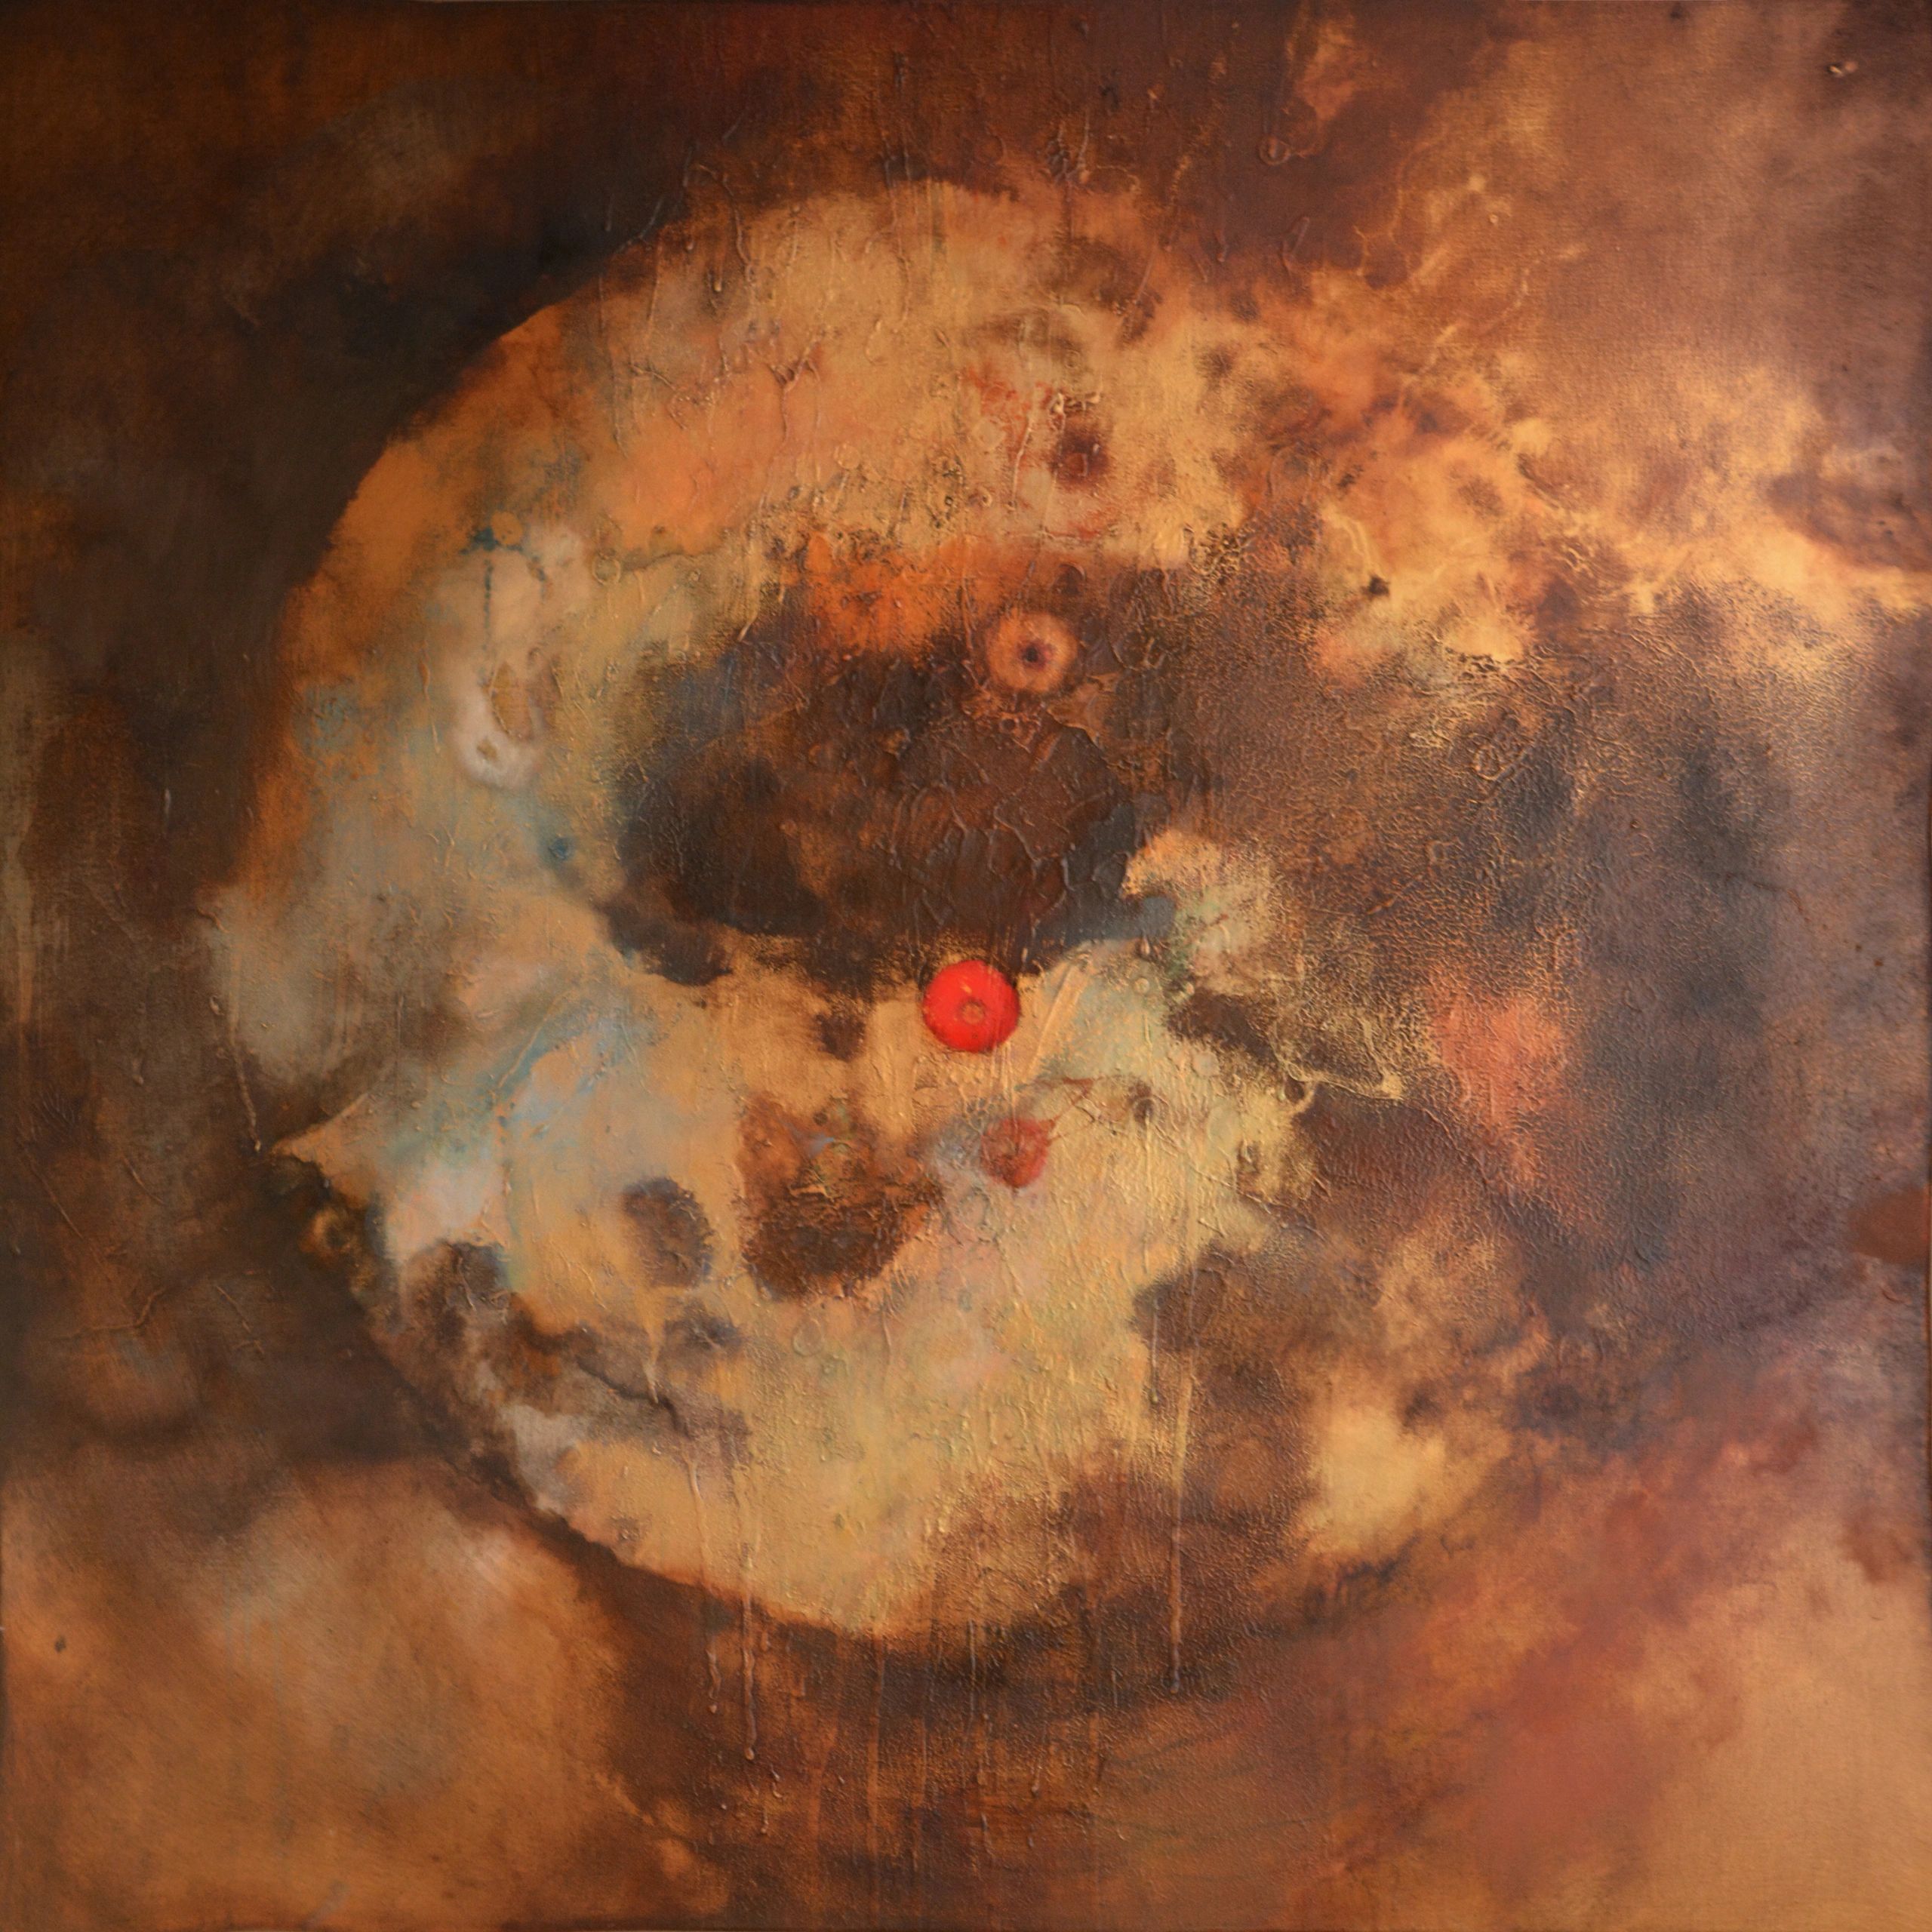 Red  Giant 2016 by Katrina Sadrak
Oil and acrylic gold on canvas
100 x 100 cm